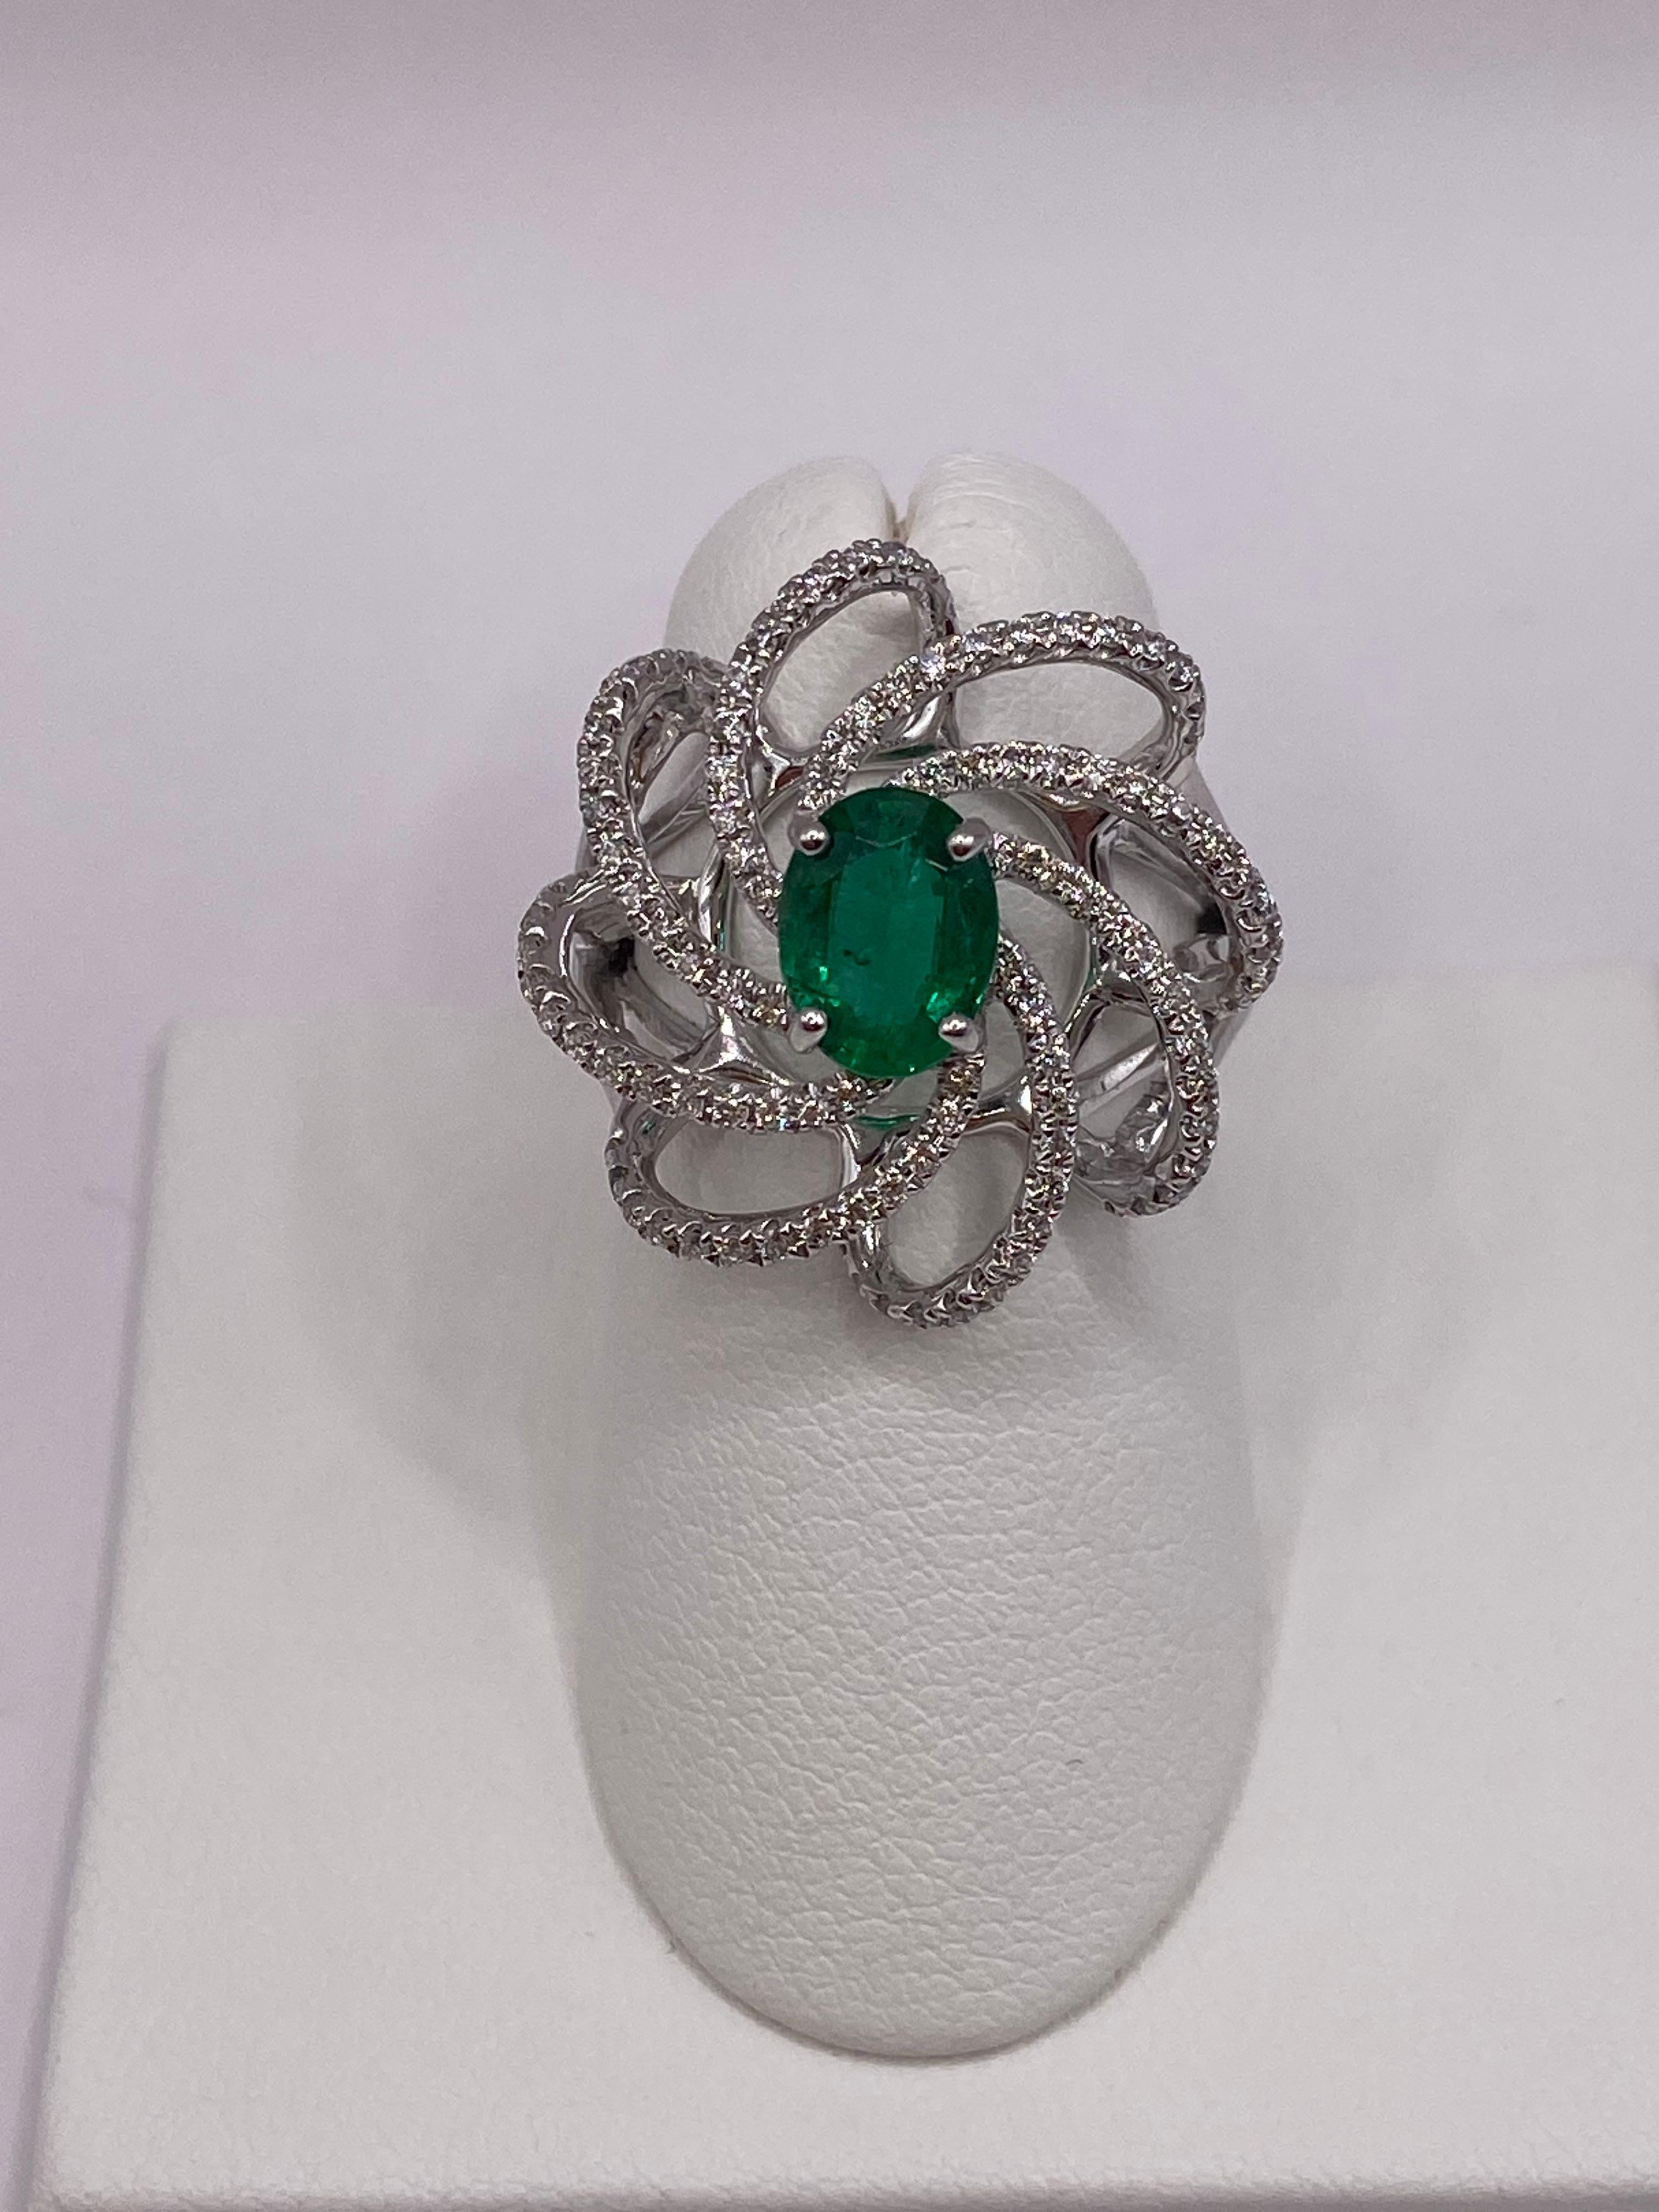 Metal: 18KT White Gold
Finger Size: 6.5
(Ring is size 6.5, but is sizable upon request)

Number of Oval Emeralds: 1
Carat Weight: 0.94ctw
Stone Size: 7.75 x 5.85mm

Number of Round Diamonds: 108
Carat Weight: 0.48ctw